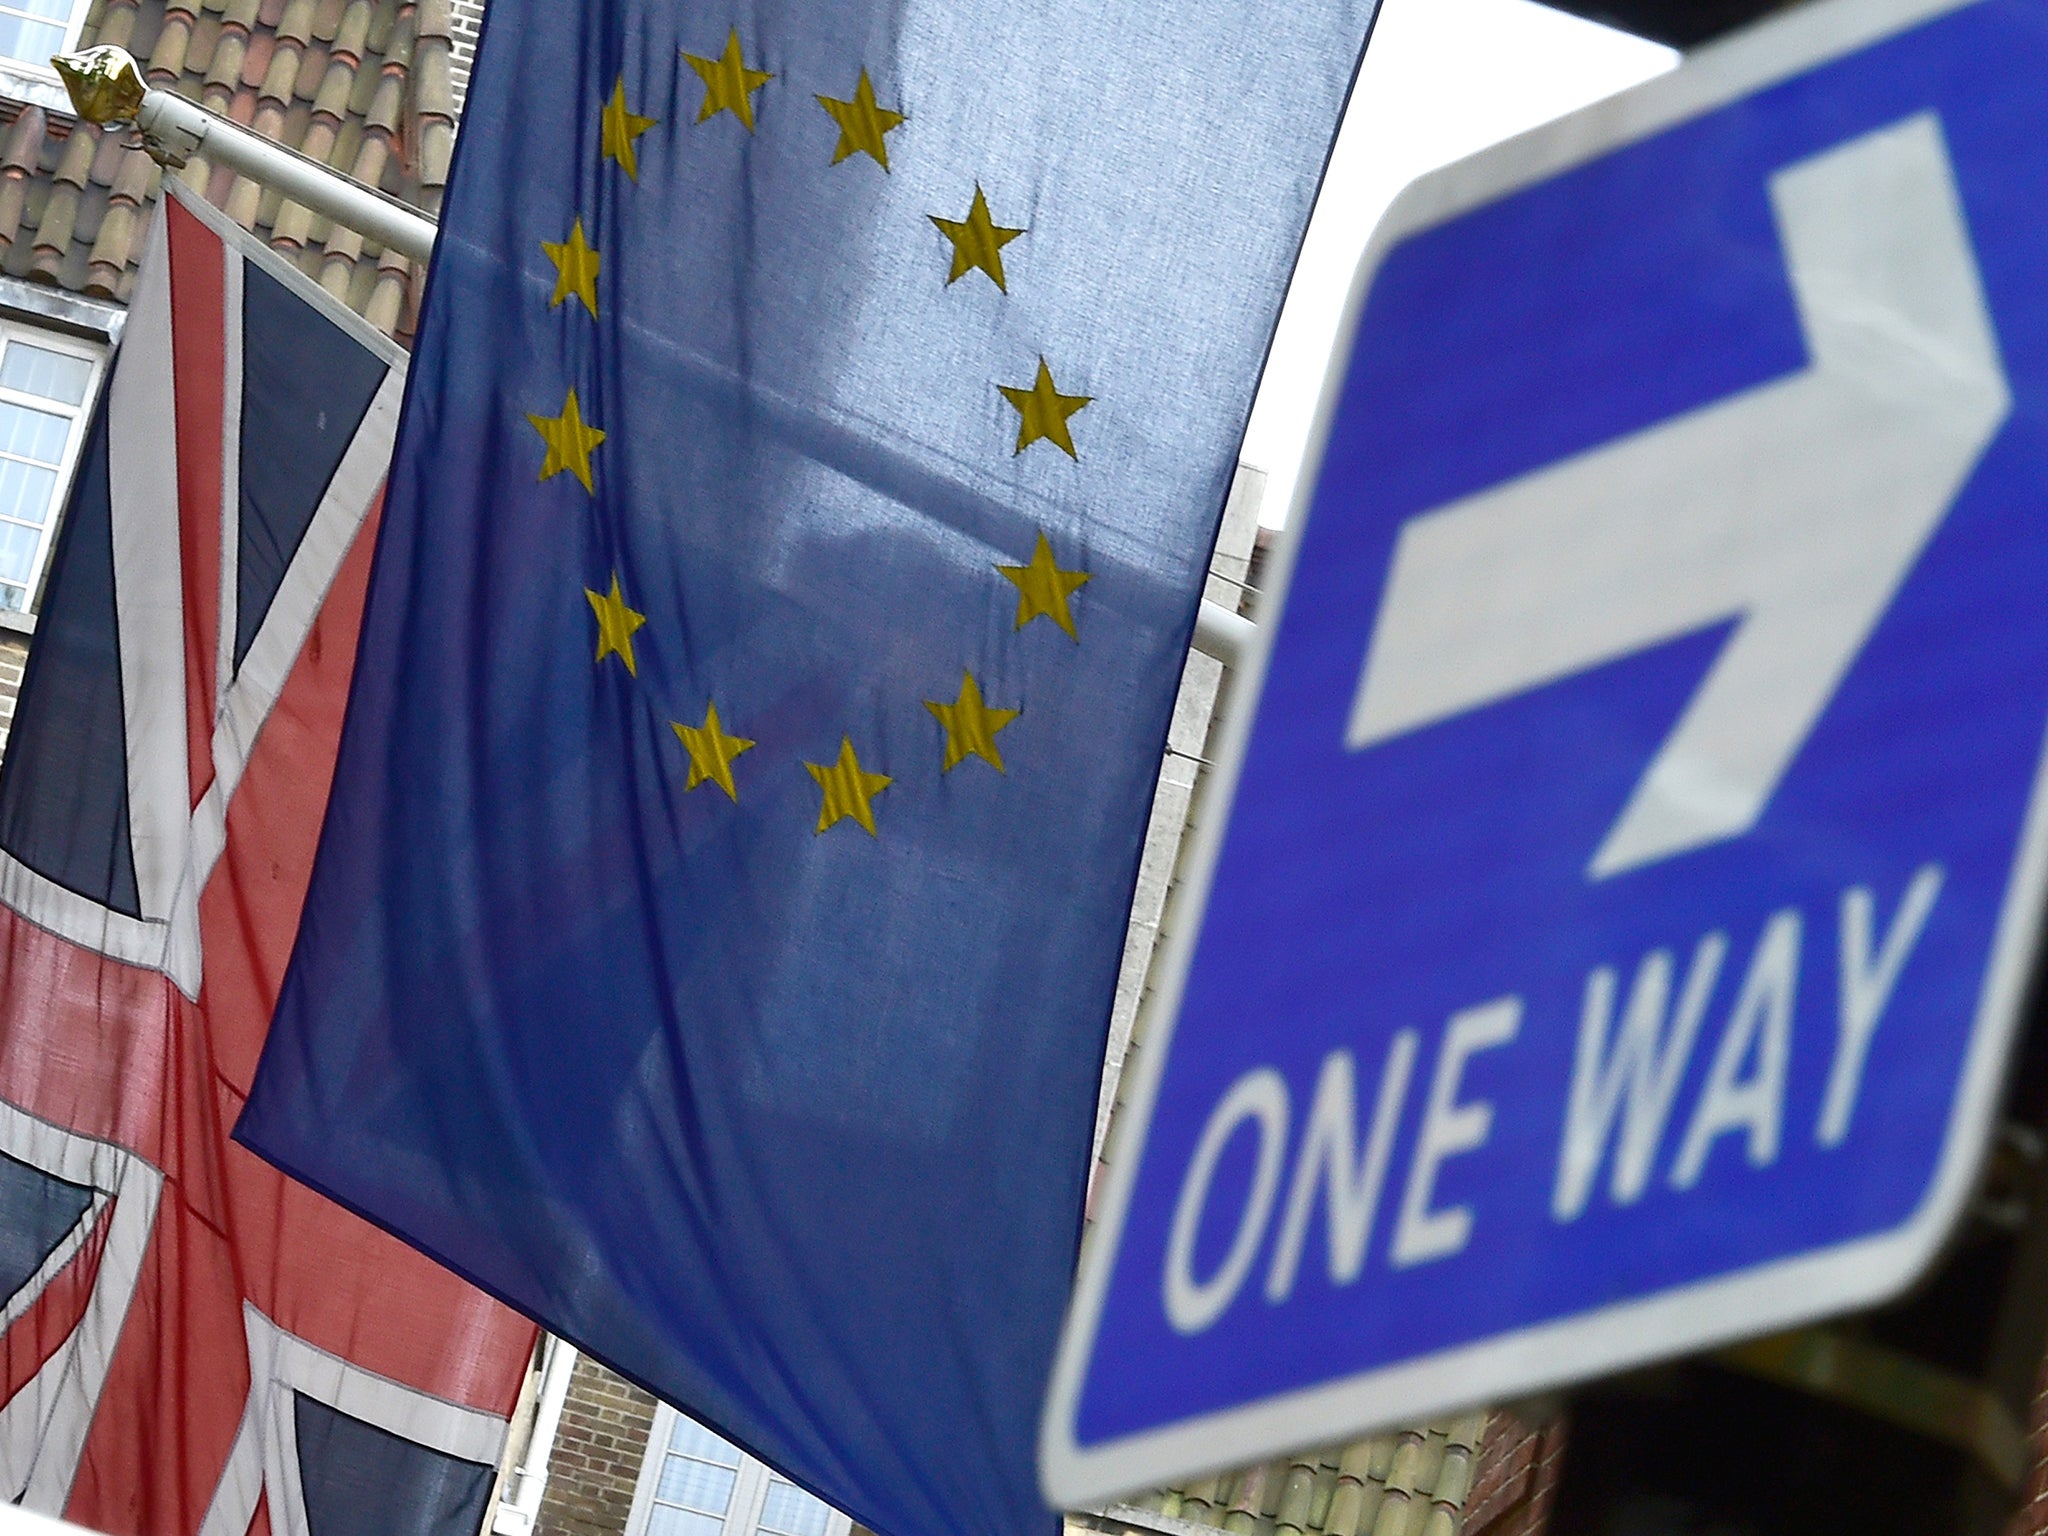 According to a new survey, 52 per cent of people say Britain should leave the EU, while 48 per cent want to remain